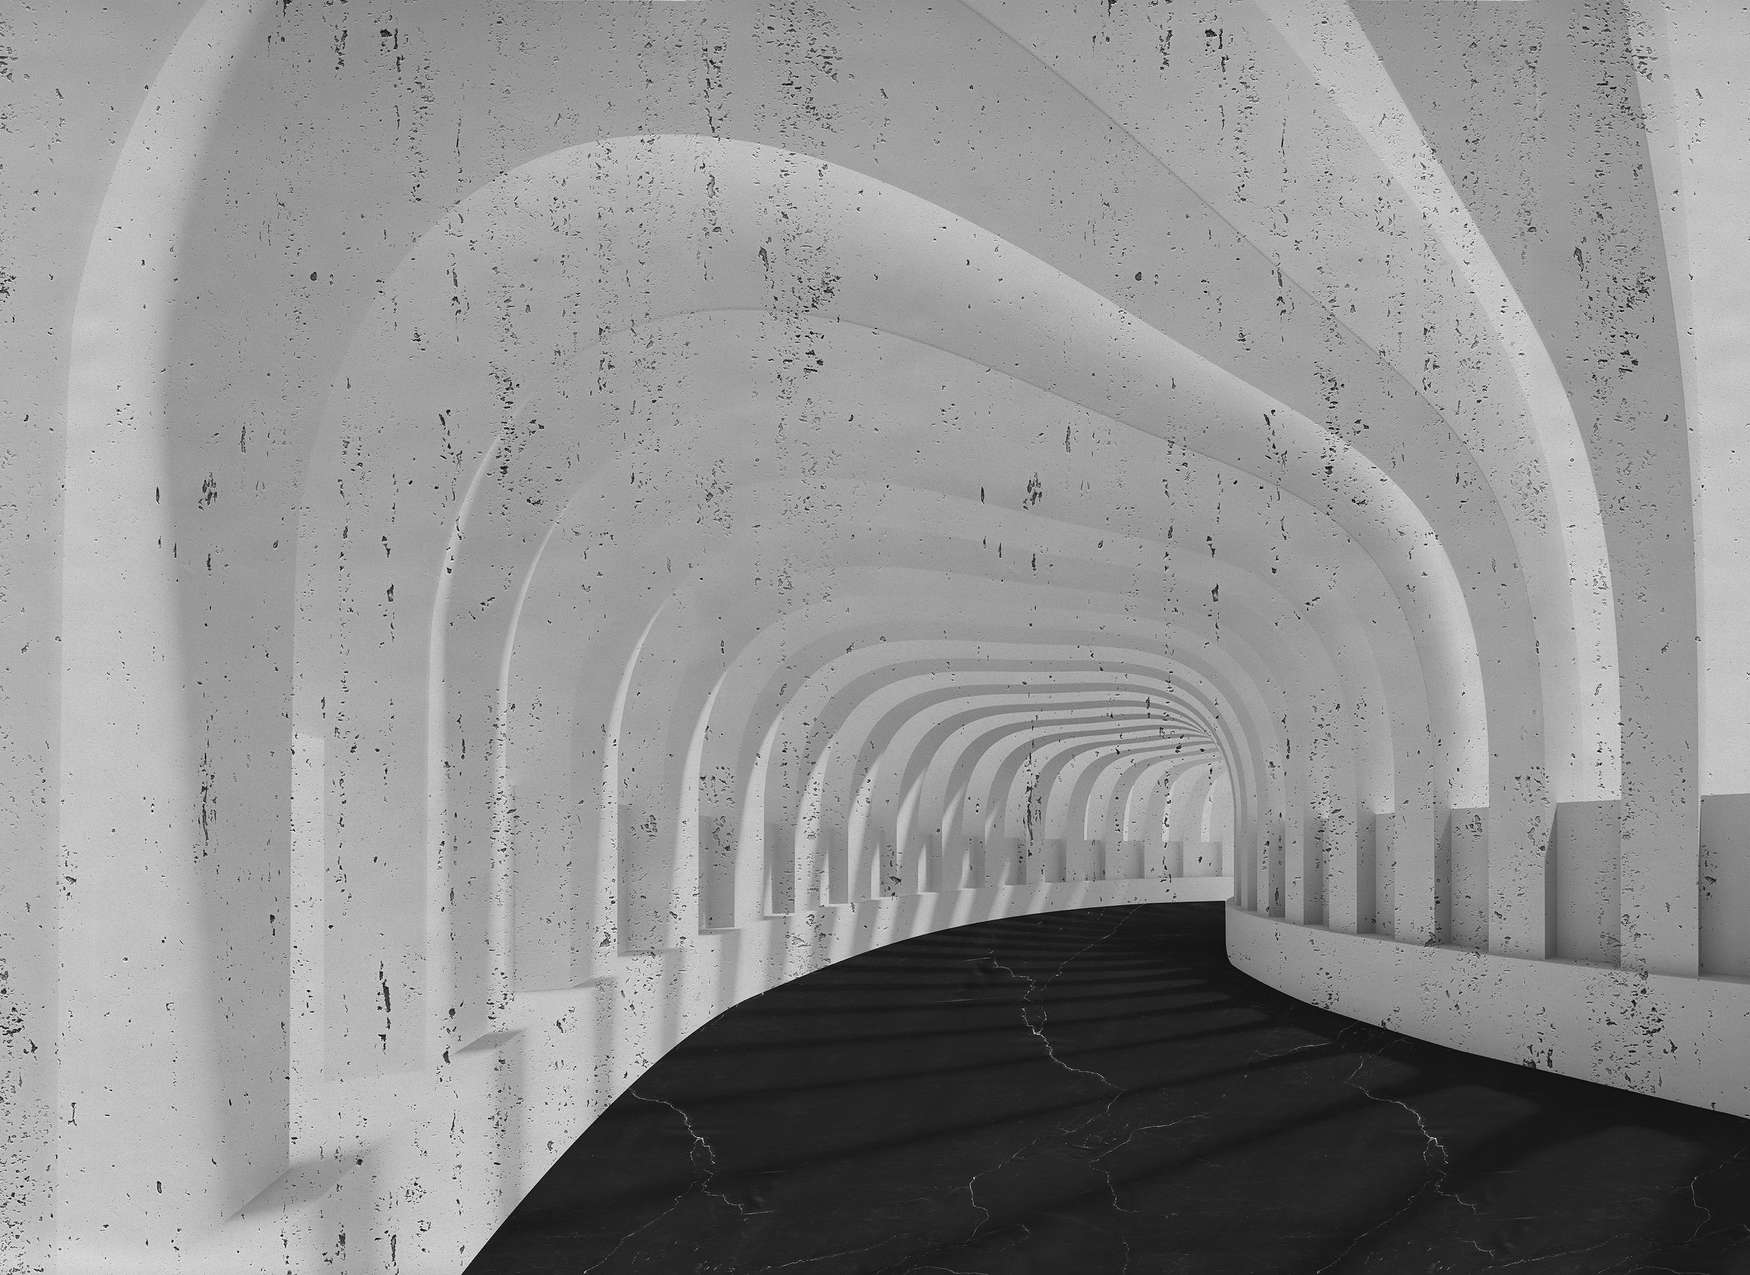             Photo wallpaper 3D Concrete tunnel with arches - Grey, Black
        